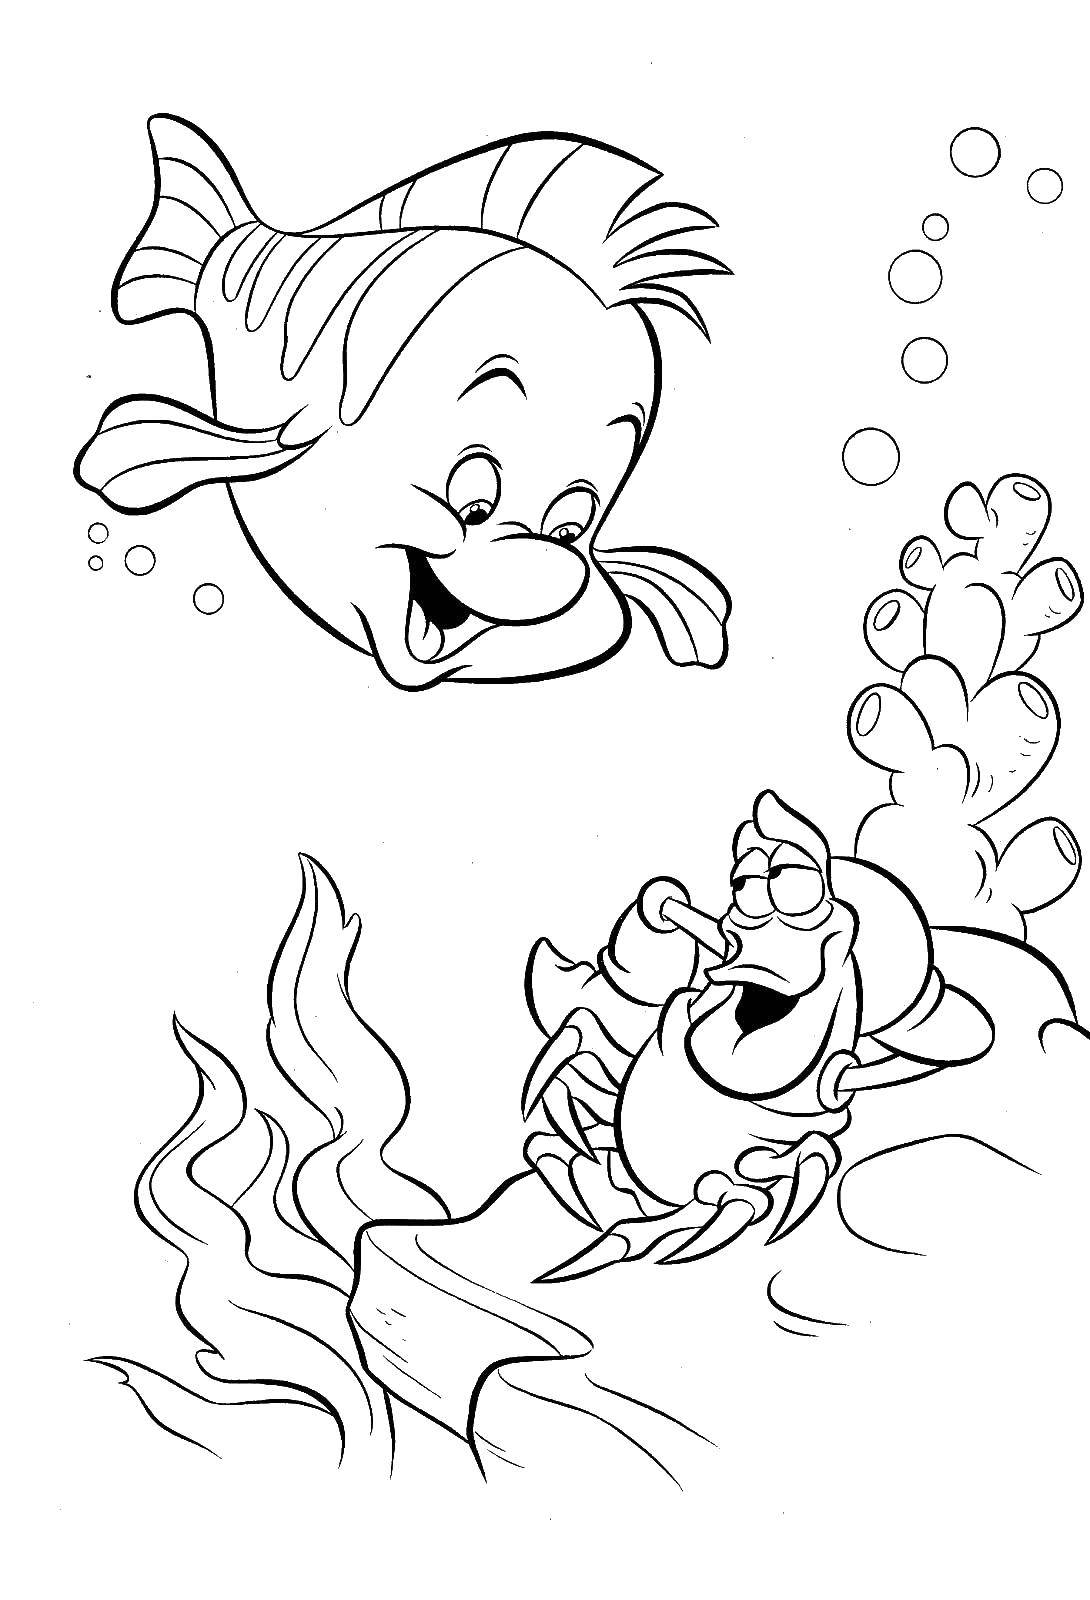 Coloring Fish and crab. Category Disney cartoons. Tags:  Disney cartoons, fish, crab.